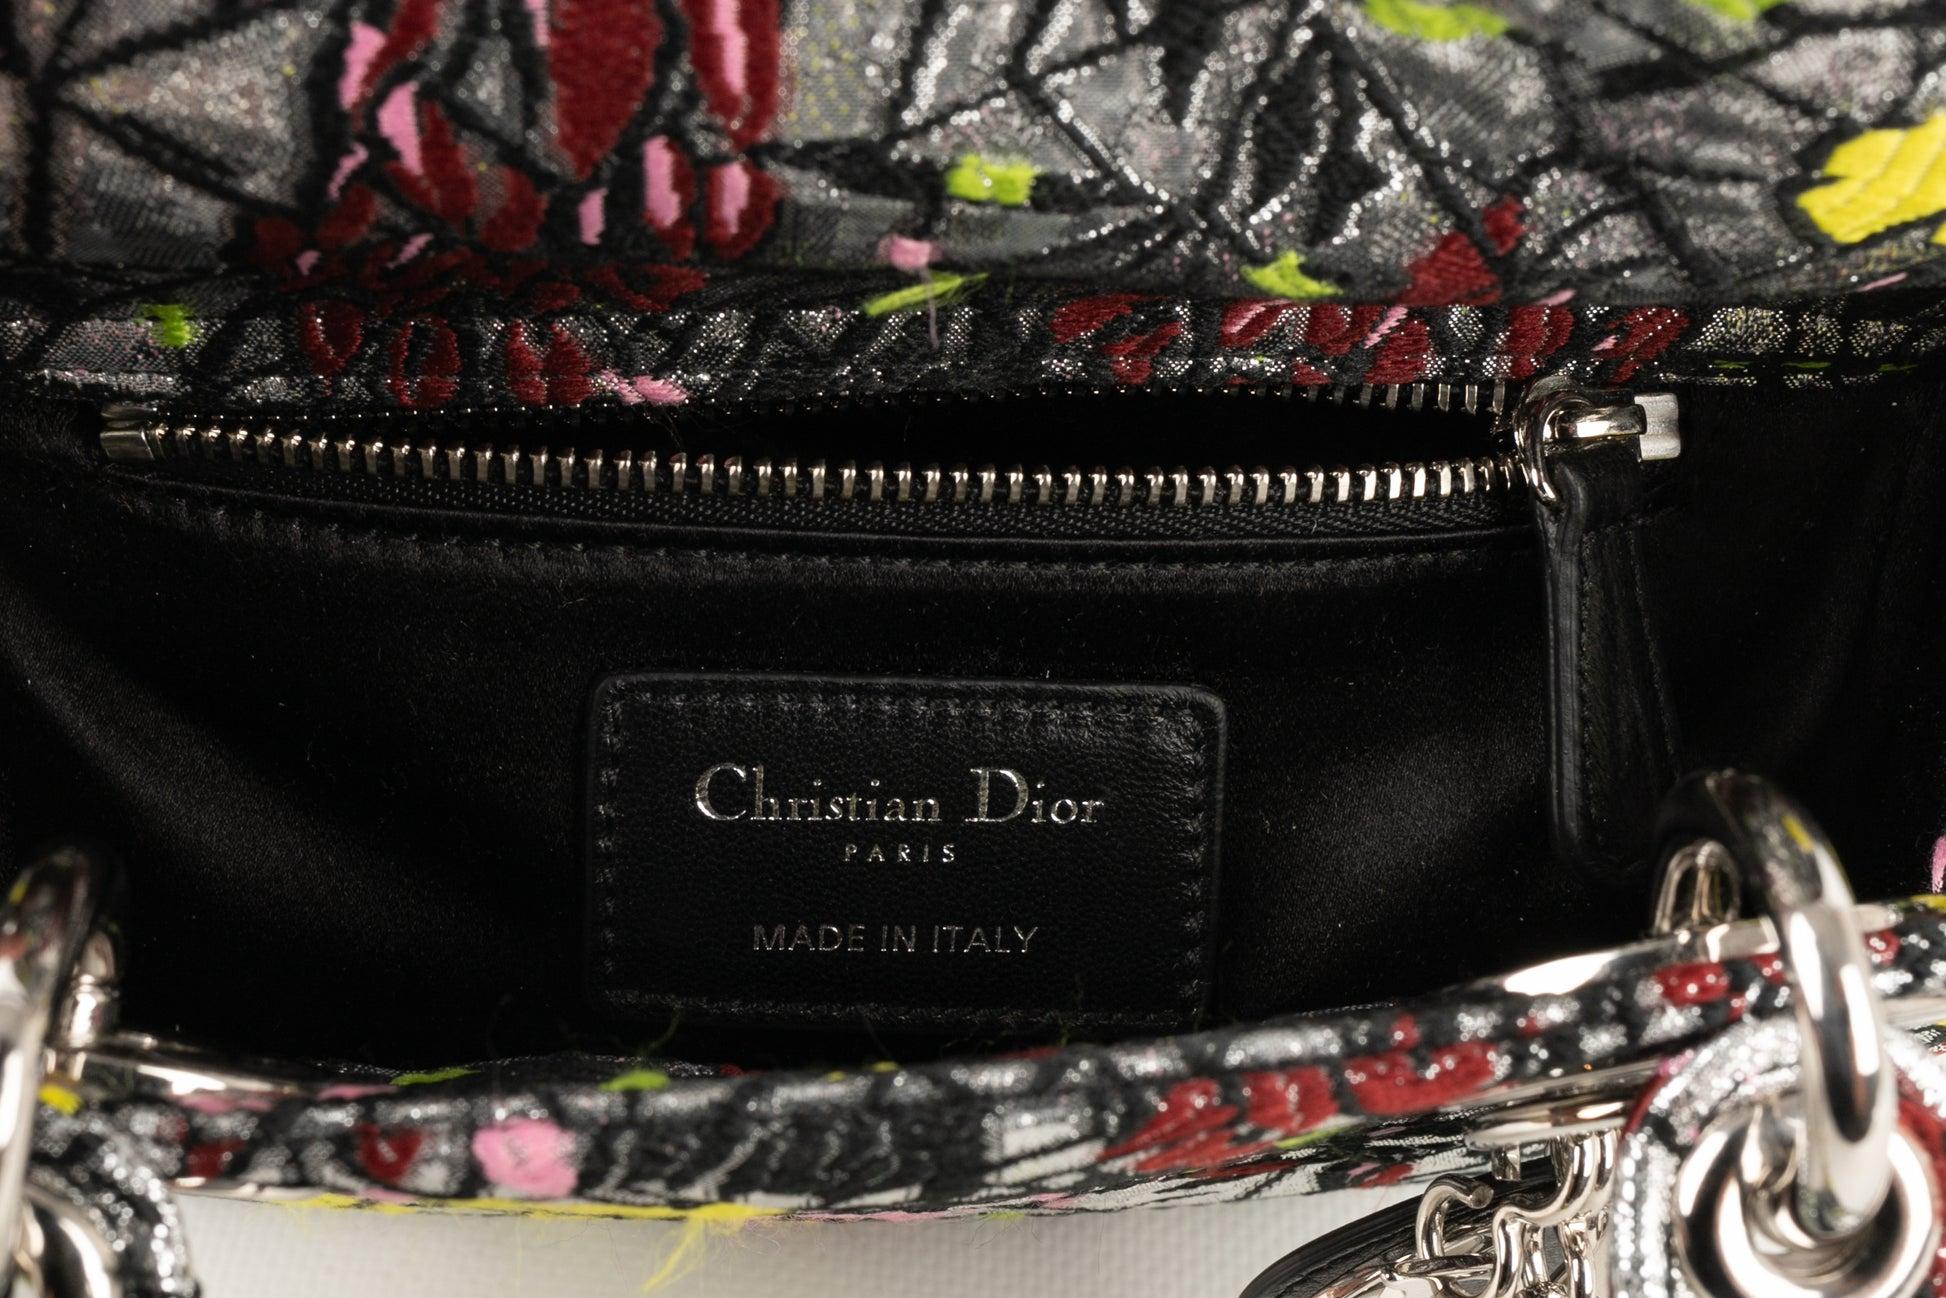 Lady Dior Bag Entirely Embroidered with Lurex and Multicolored Yarns, 2014 For Sale 4